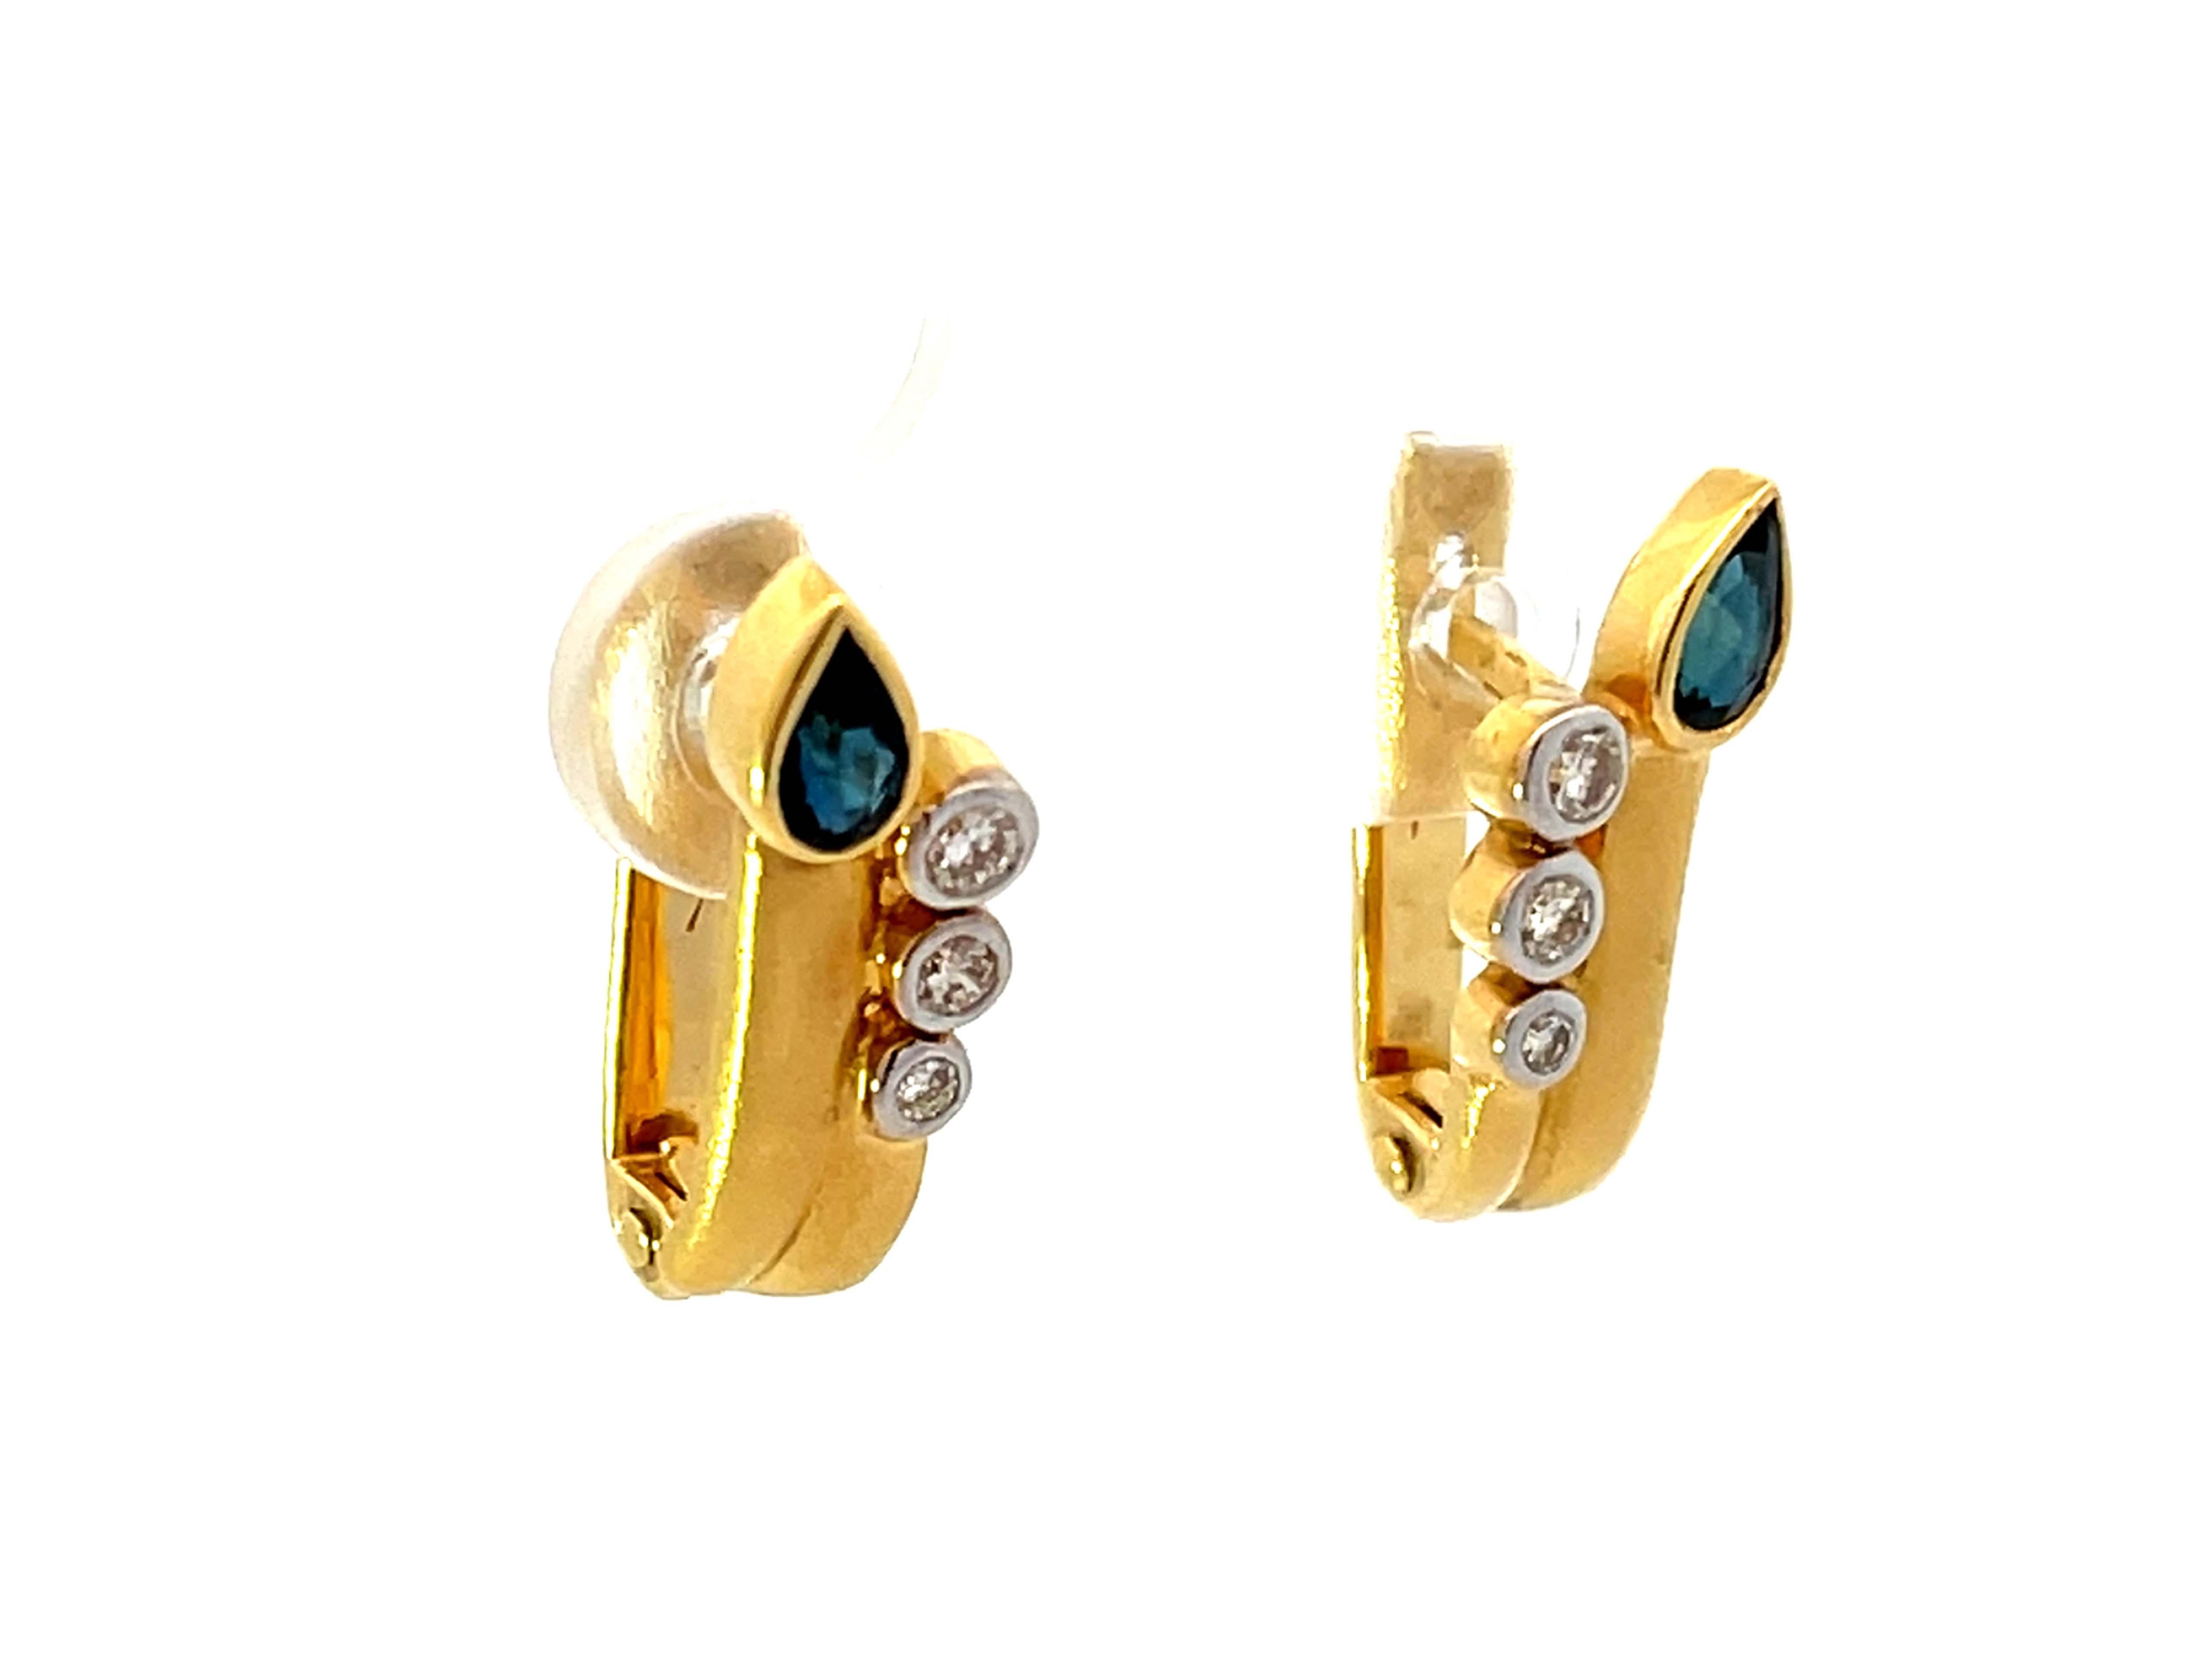 Modern Satin Finish Sapphire and Diamond Earrings 18K Yellow Gold For Sale